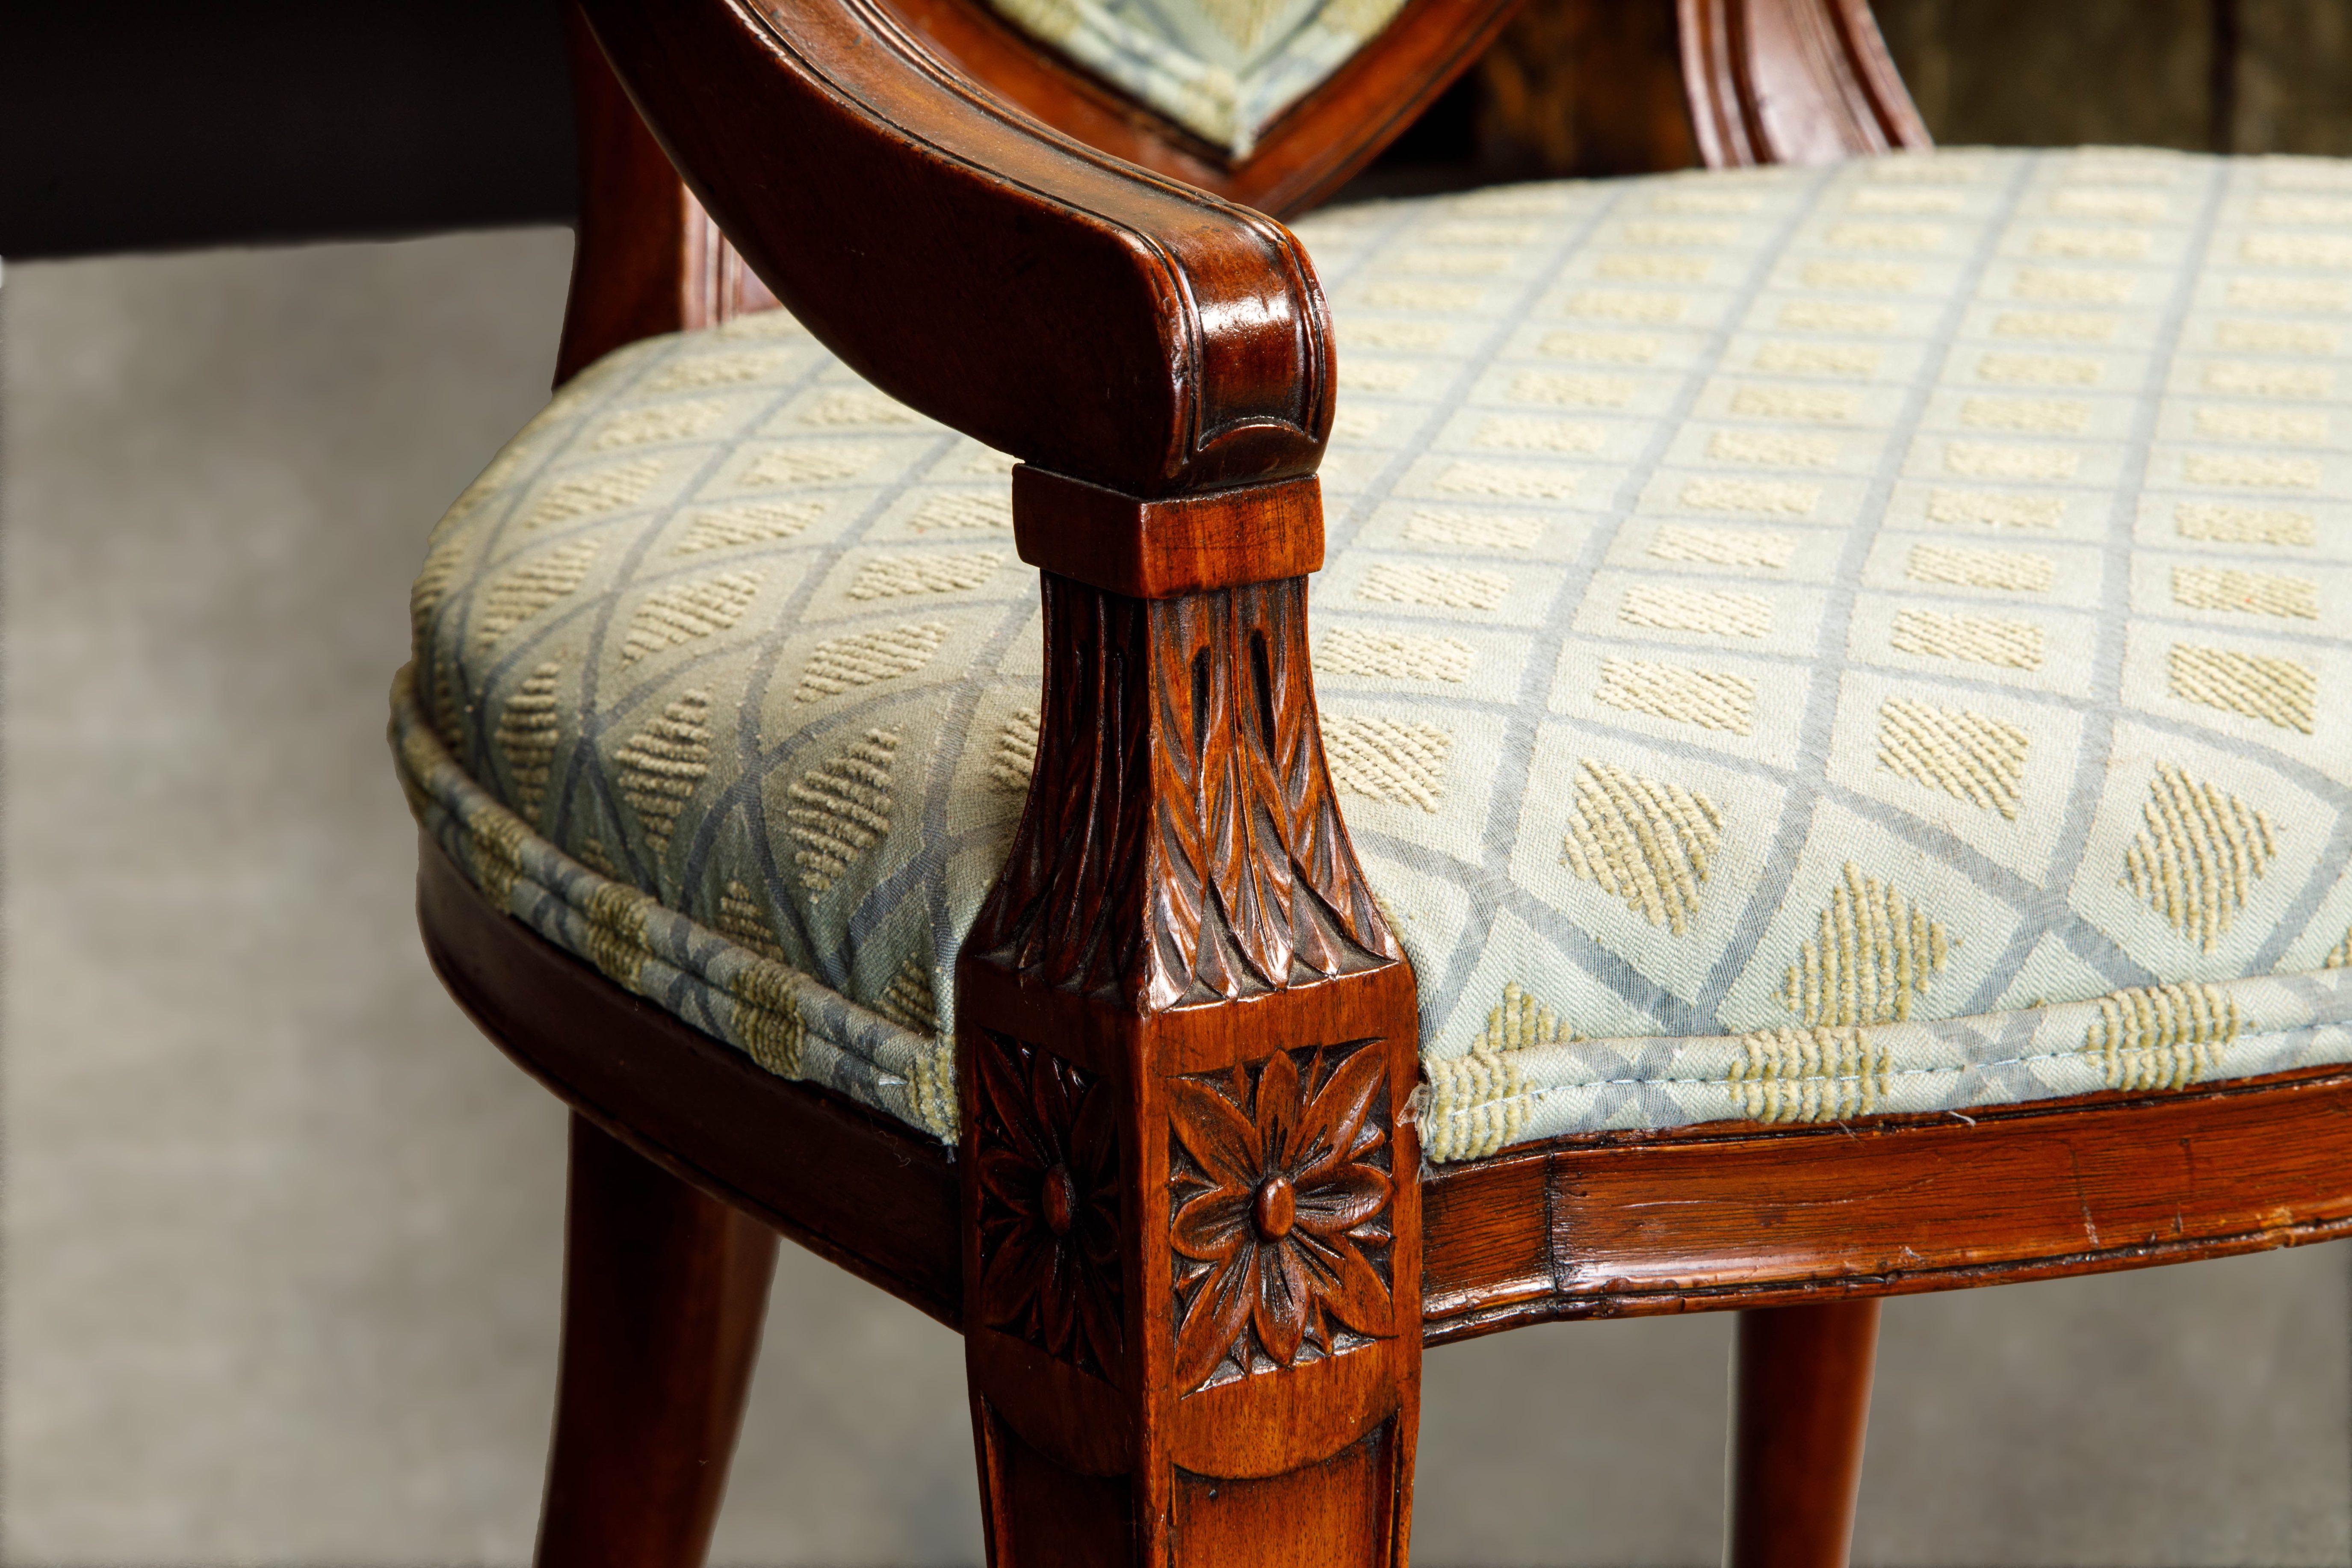 Pair of Upholstered Hepplewhite Shield-Back Armchairs w Provenance, circa 1870s For Sale 12